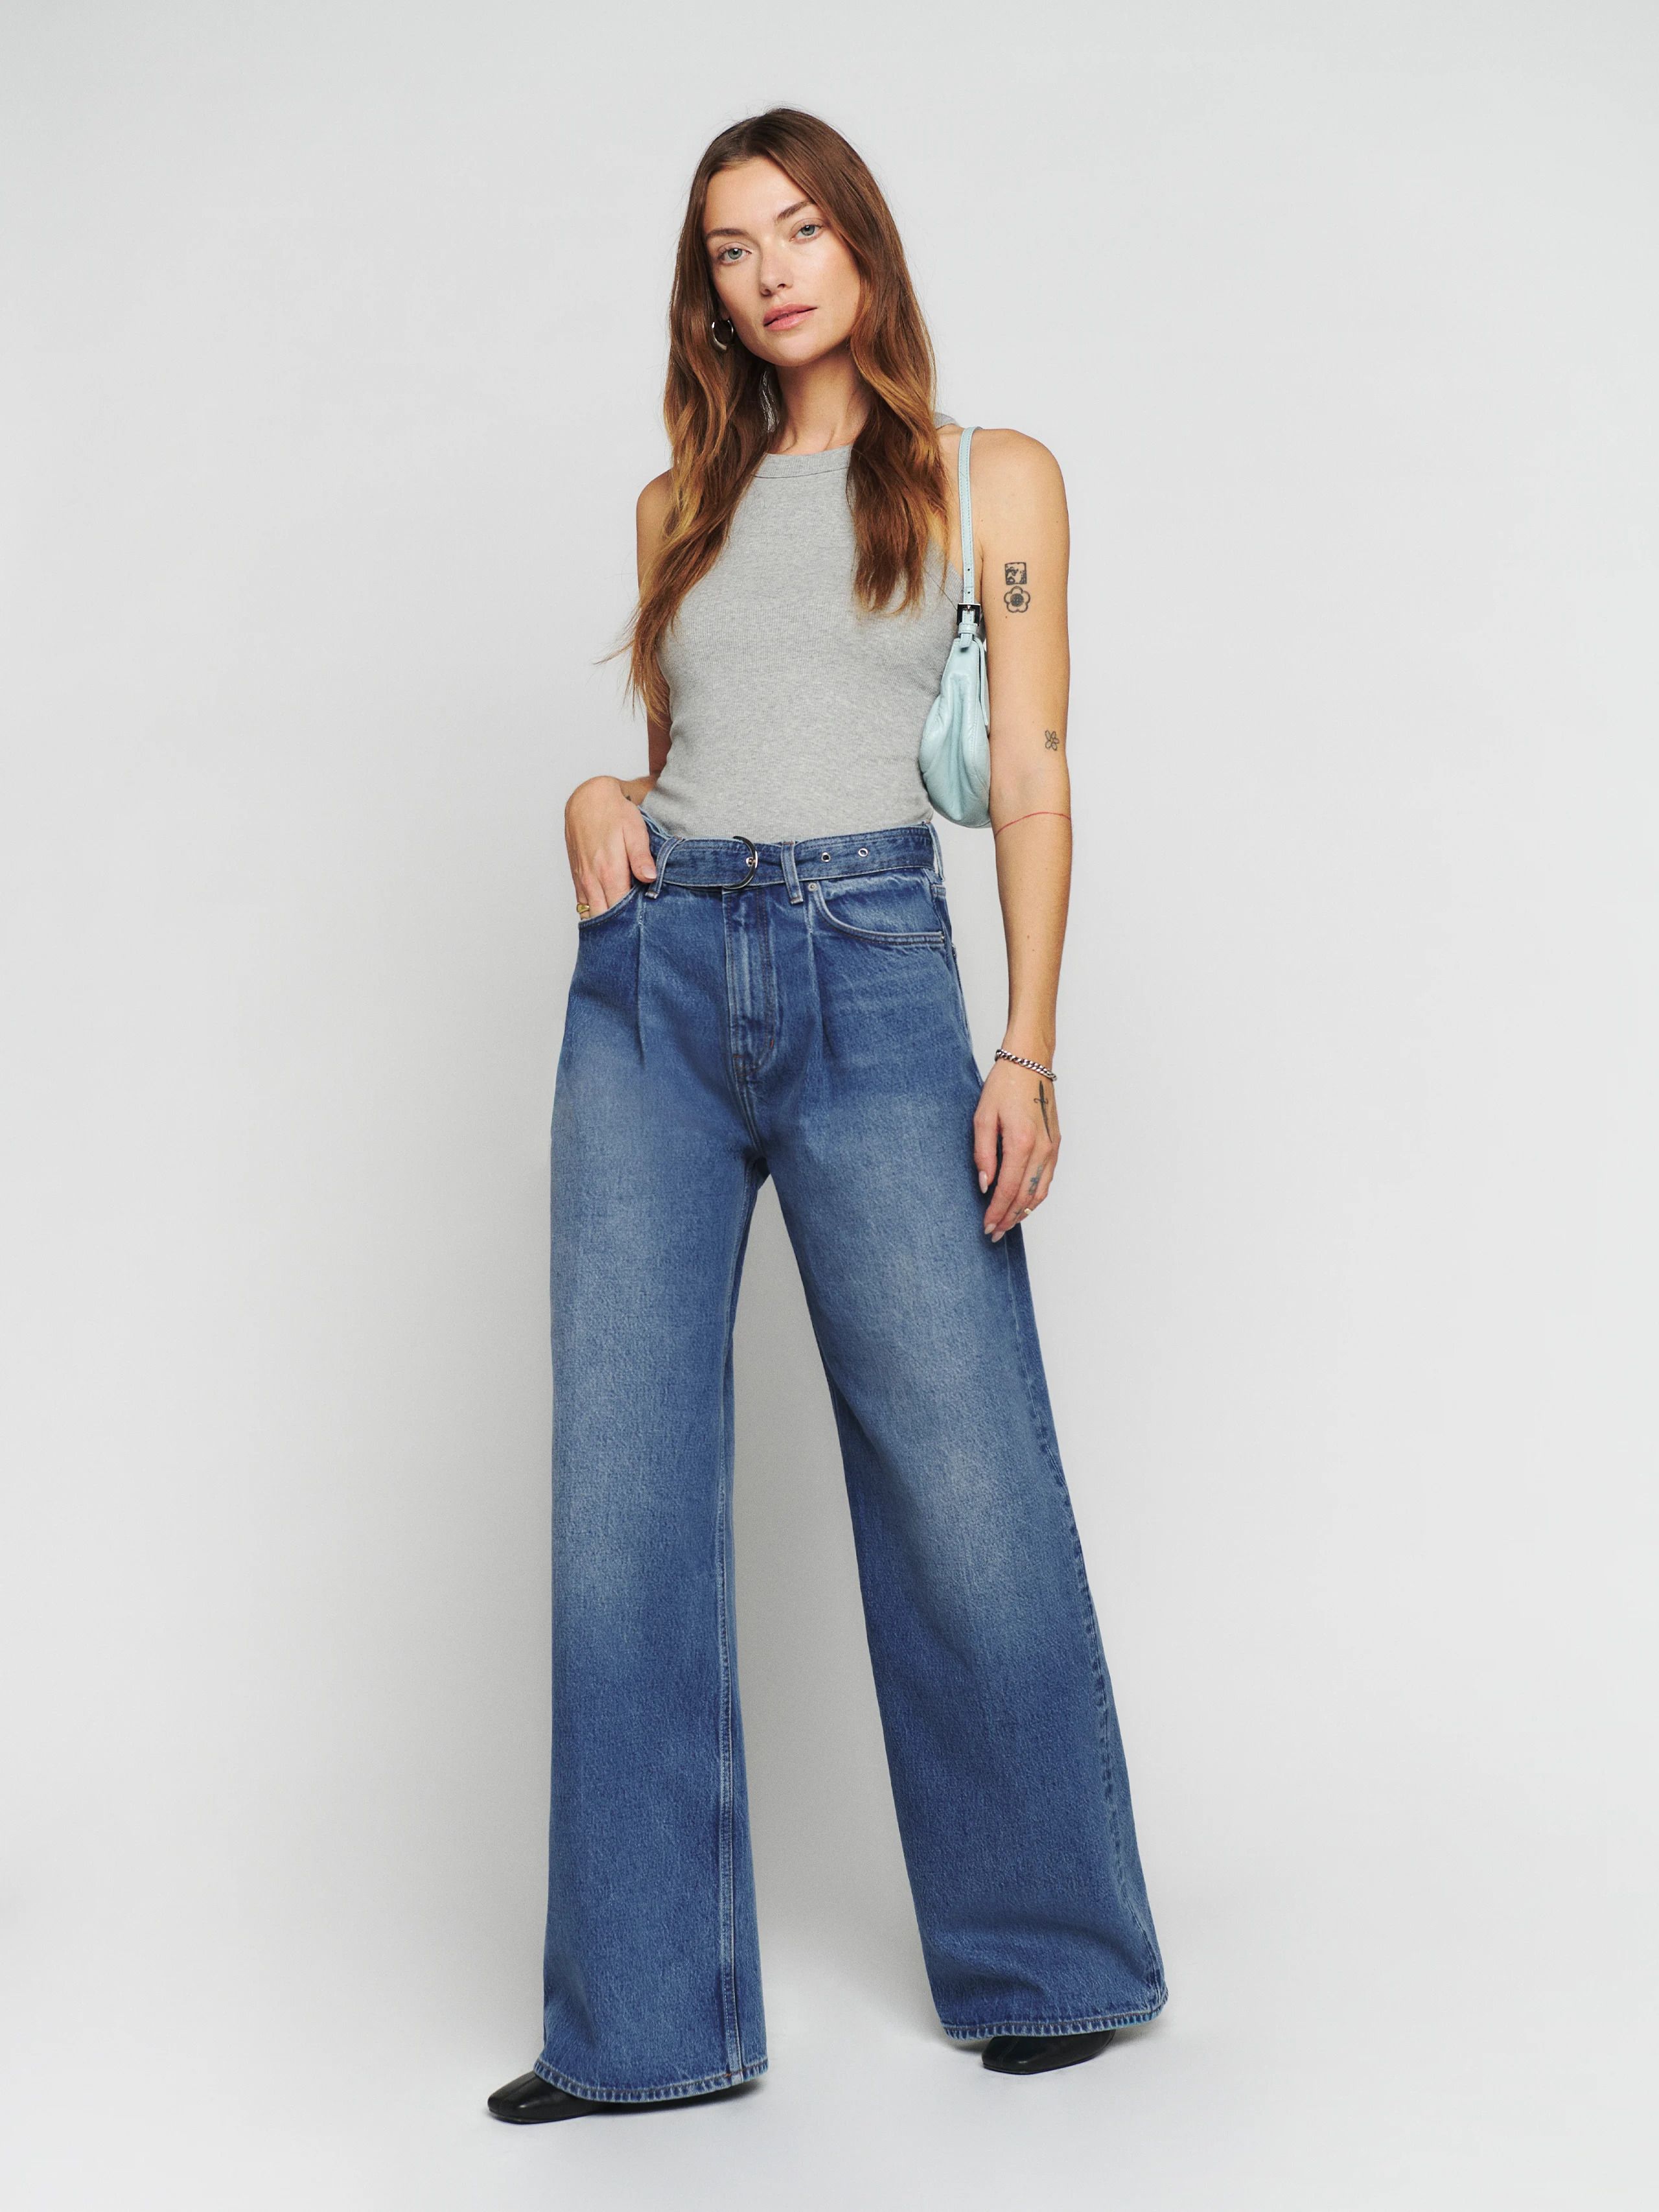 Will lowrise jeans take off this time  Lowrise jeans are back for 2018